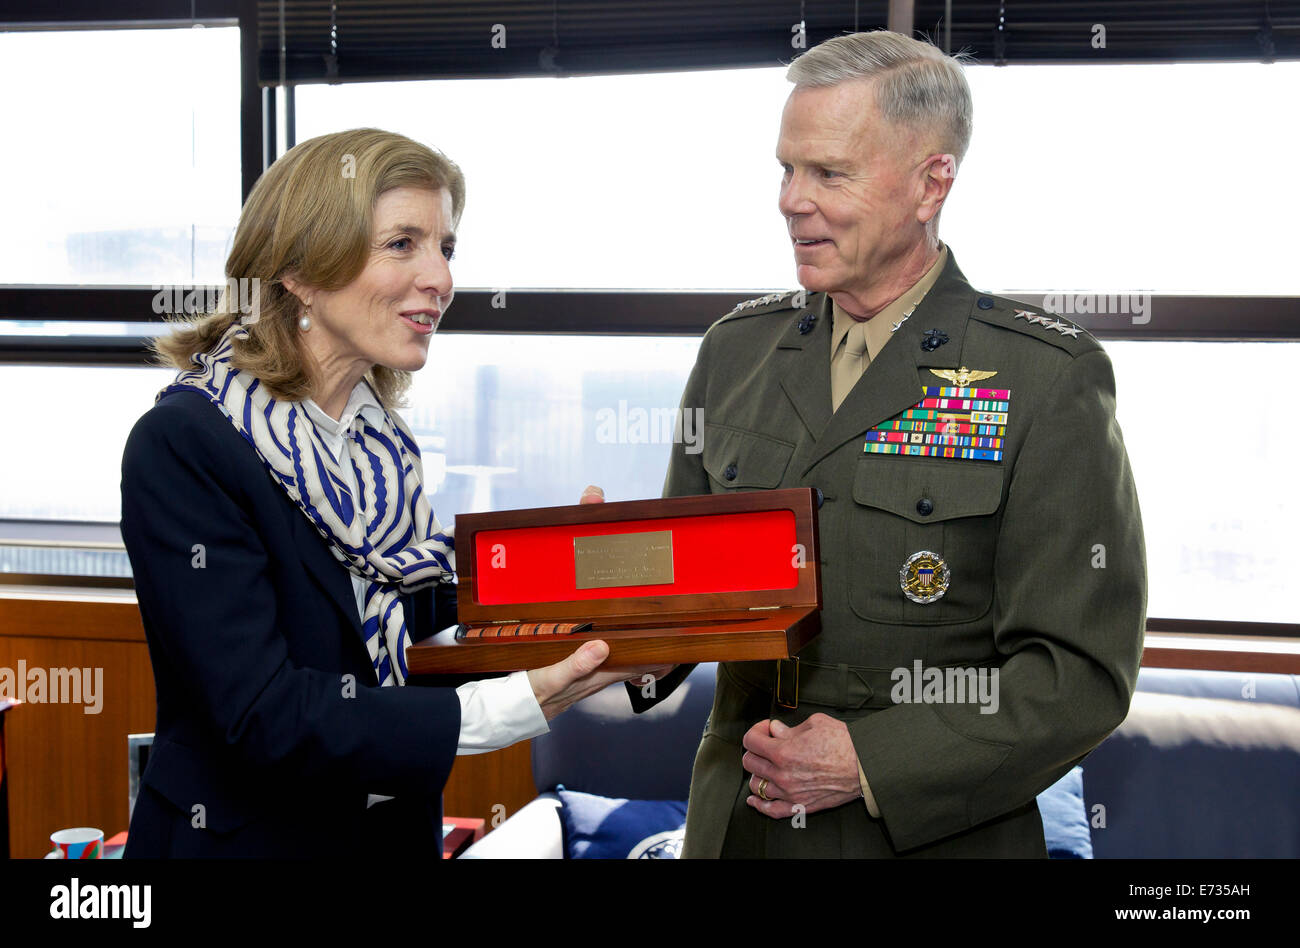 Commandant of the U.S. Marine Corps Gen. James F. Amos presents a gift to U.S. Ambassador to Japan Caroline Kennedy during a visit to the U.S. Embassy April 15, 2014 in Tokyo. Stock Photo